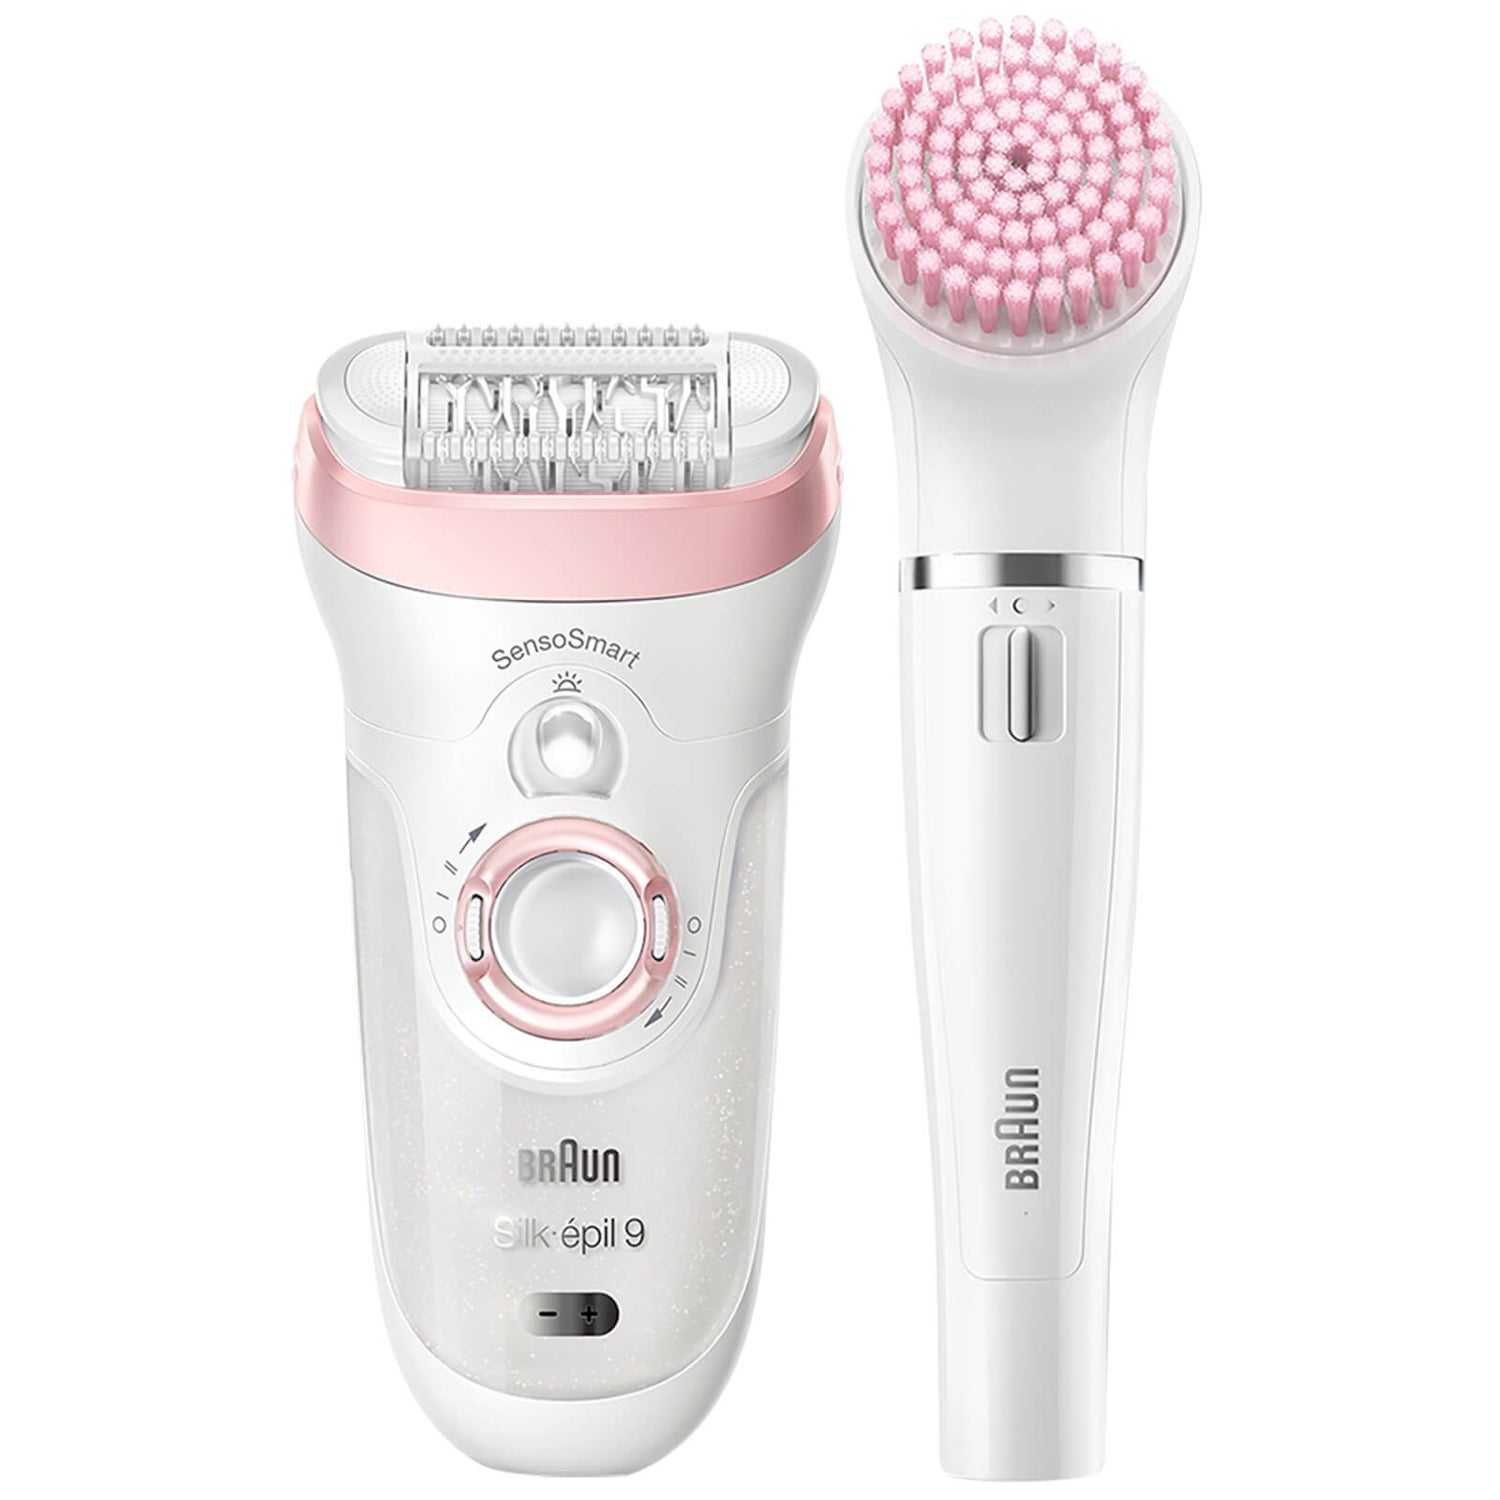 Epilator Dry Braun Beauty including FaceSpa - Braun Silk-épil allbeauty & Wet 8 Silk-épil 9 Epilators with BS 9/985 Extras Set